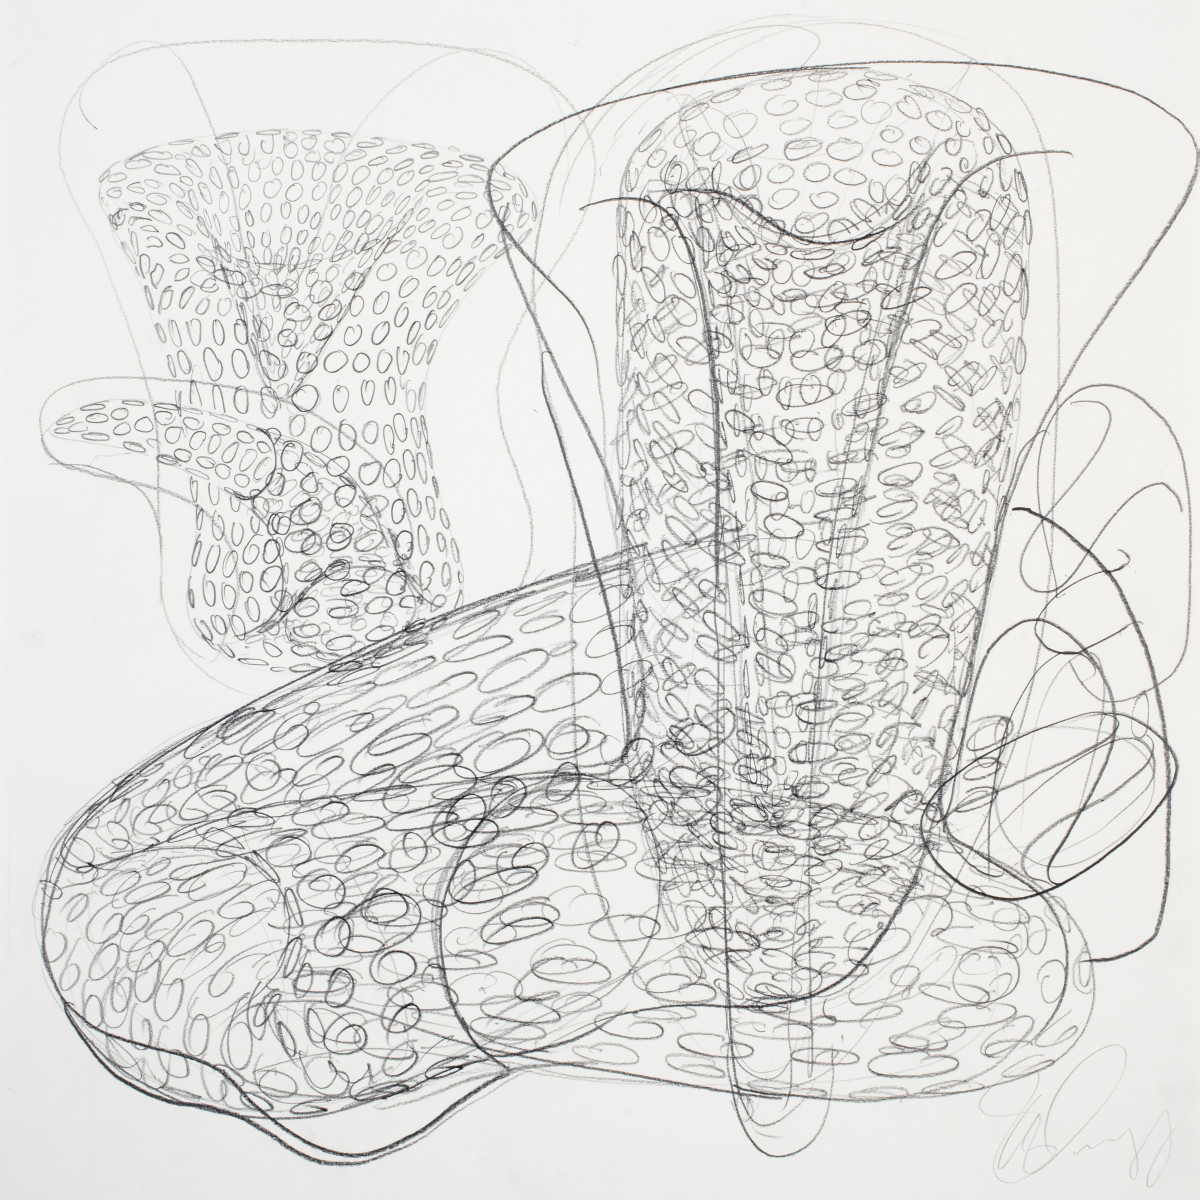 Tony Cragg, ‘Untitled, Nr. 1636’, 1998, pencil on paper                                                                       